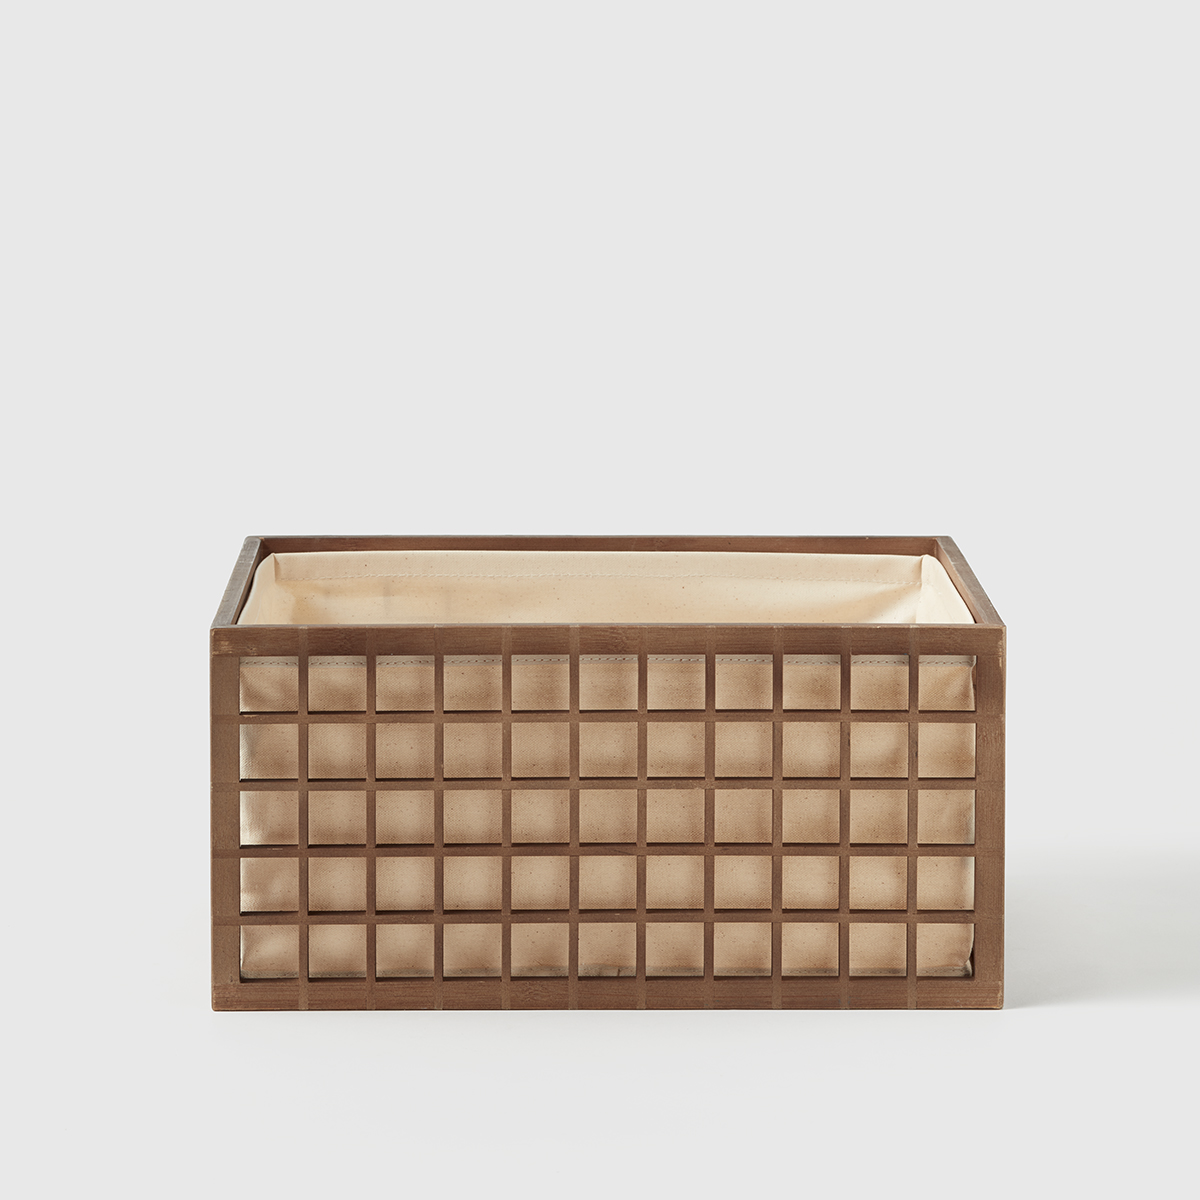 Bamboo Storage Containers